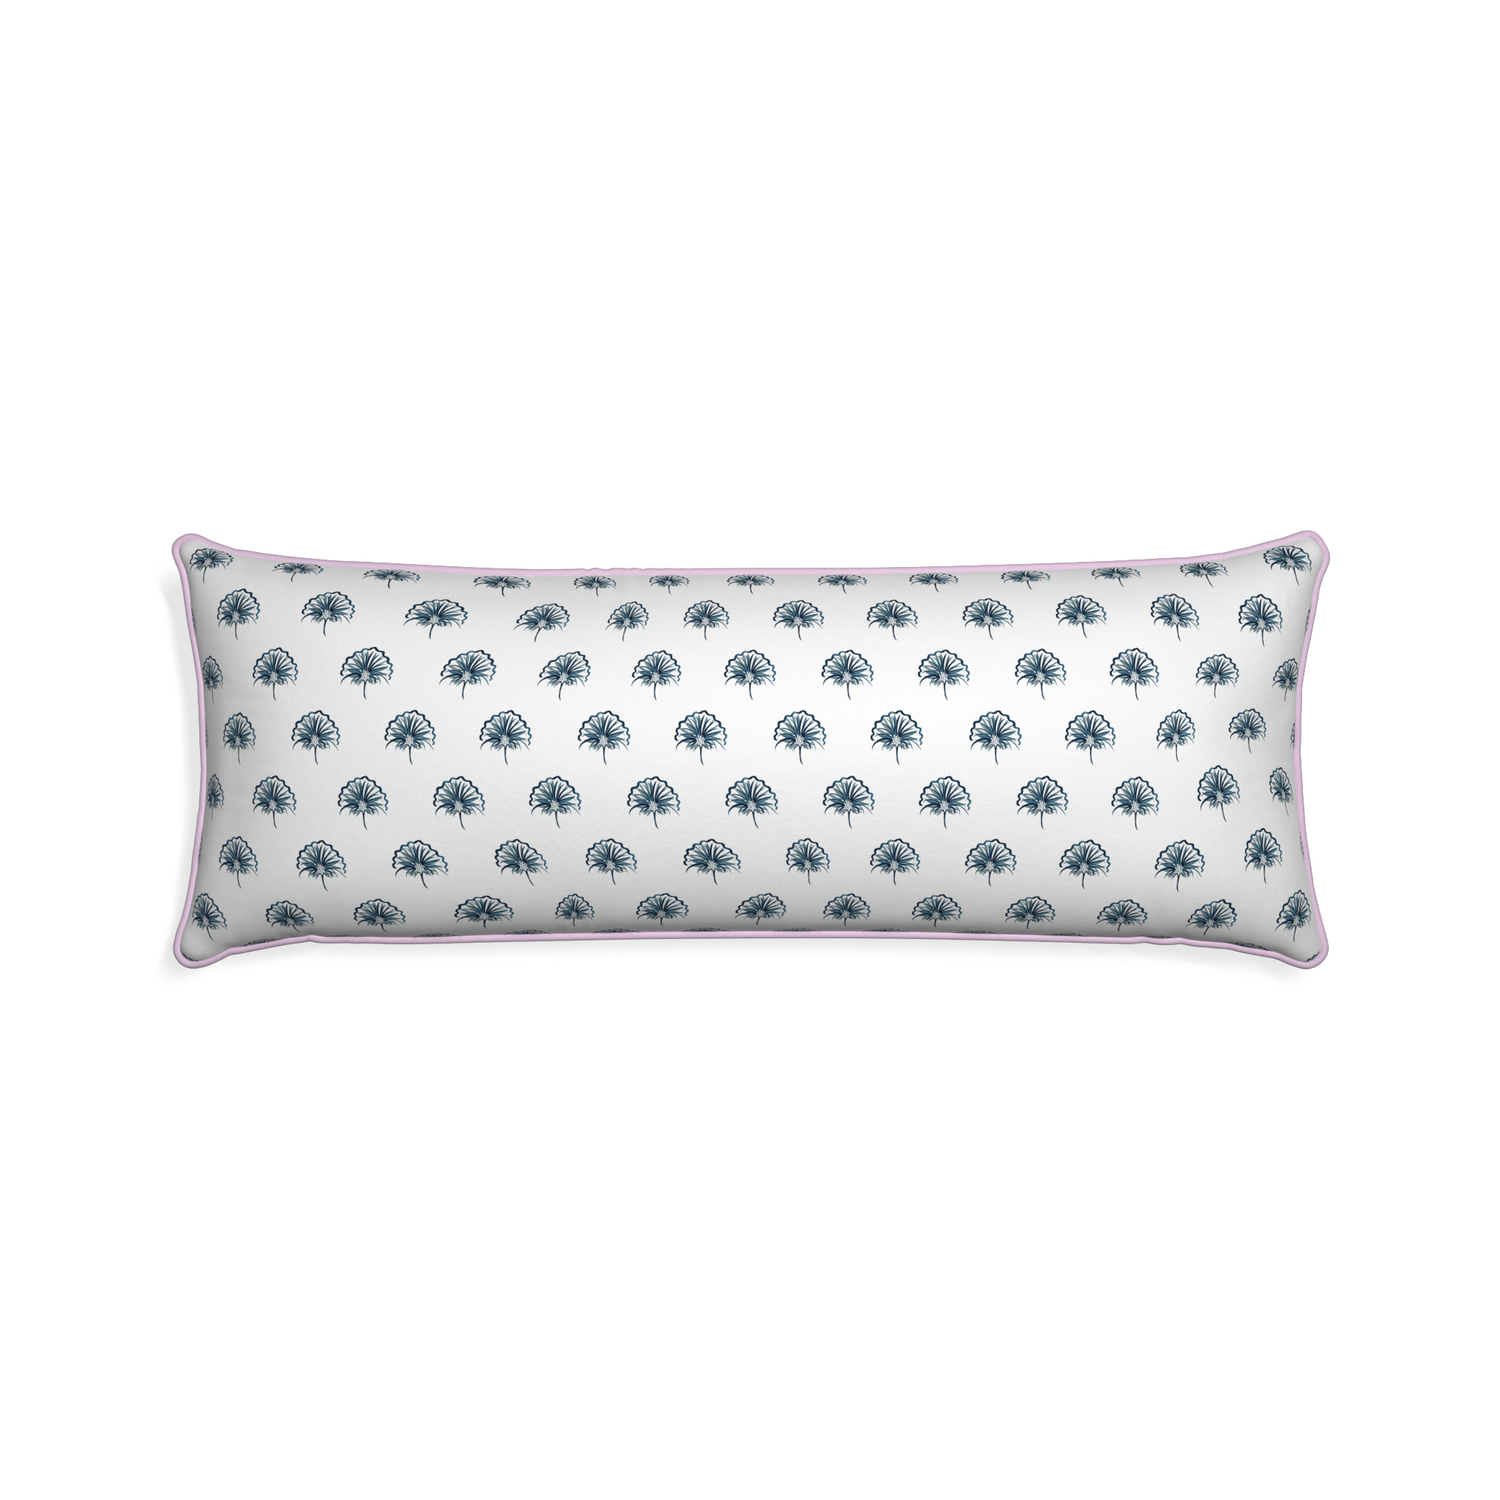 Xl-lumbar penelope midnight custom floral navypillow with l piping on white background